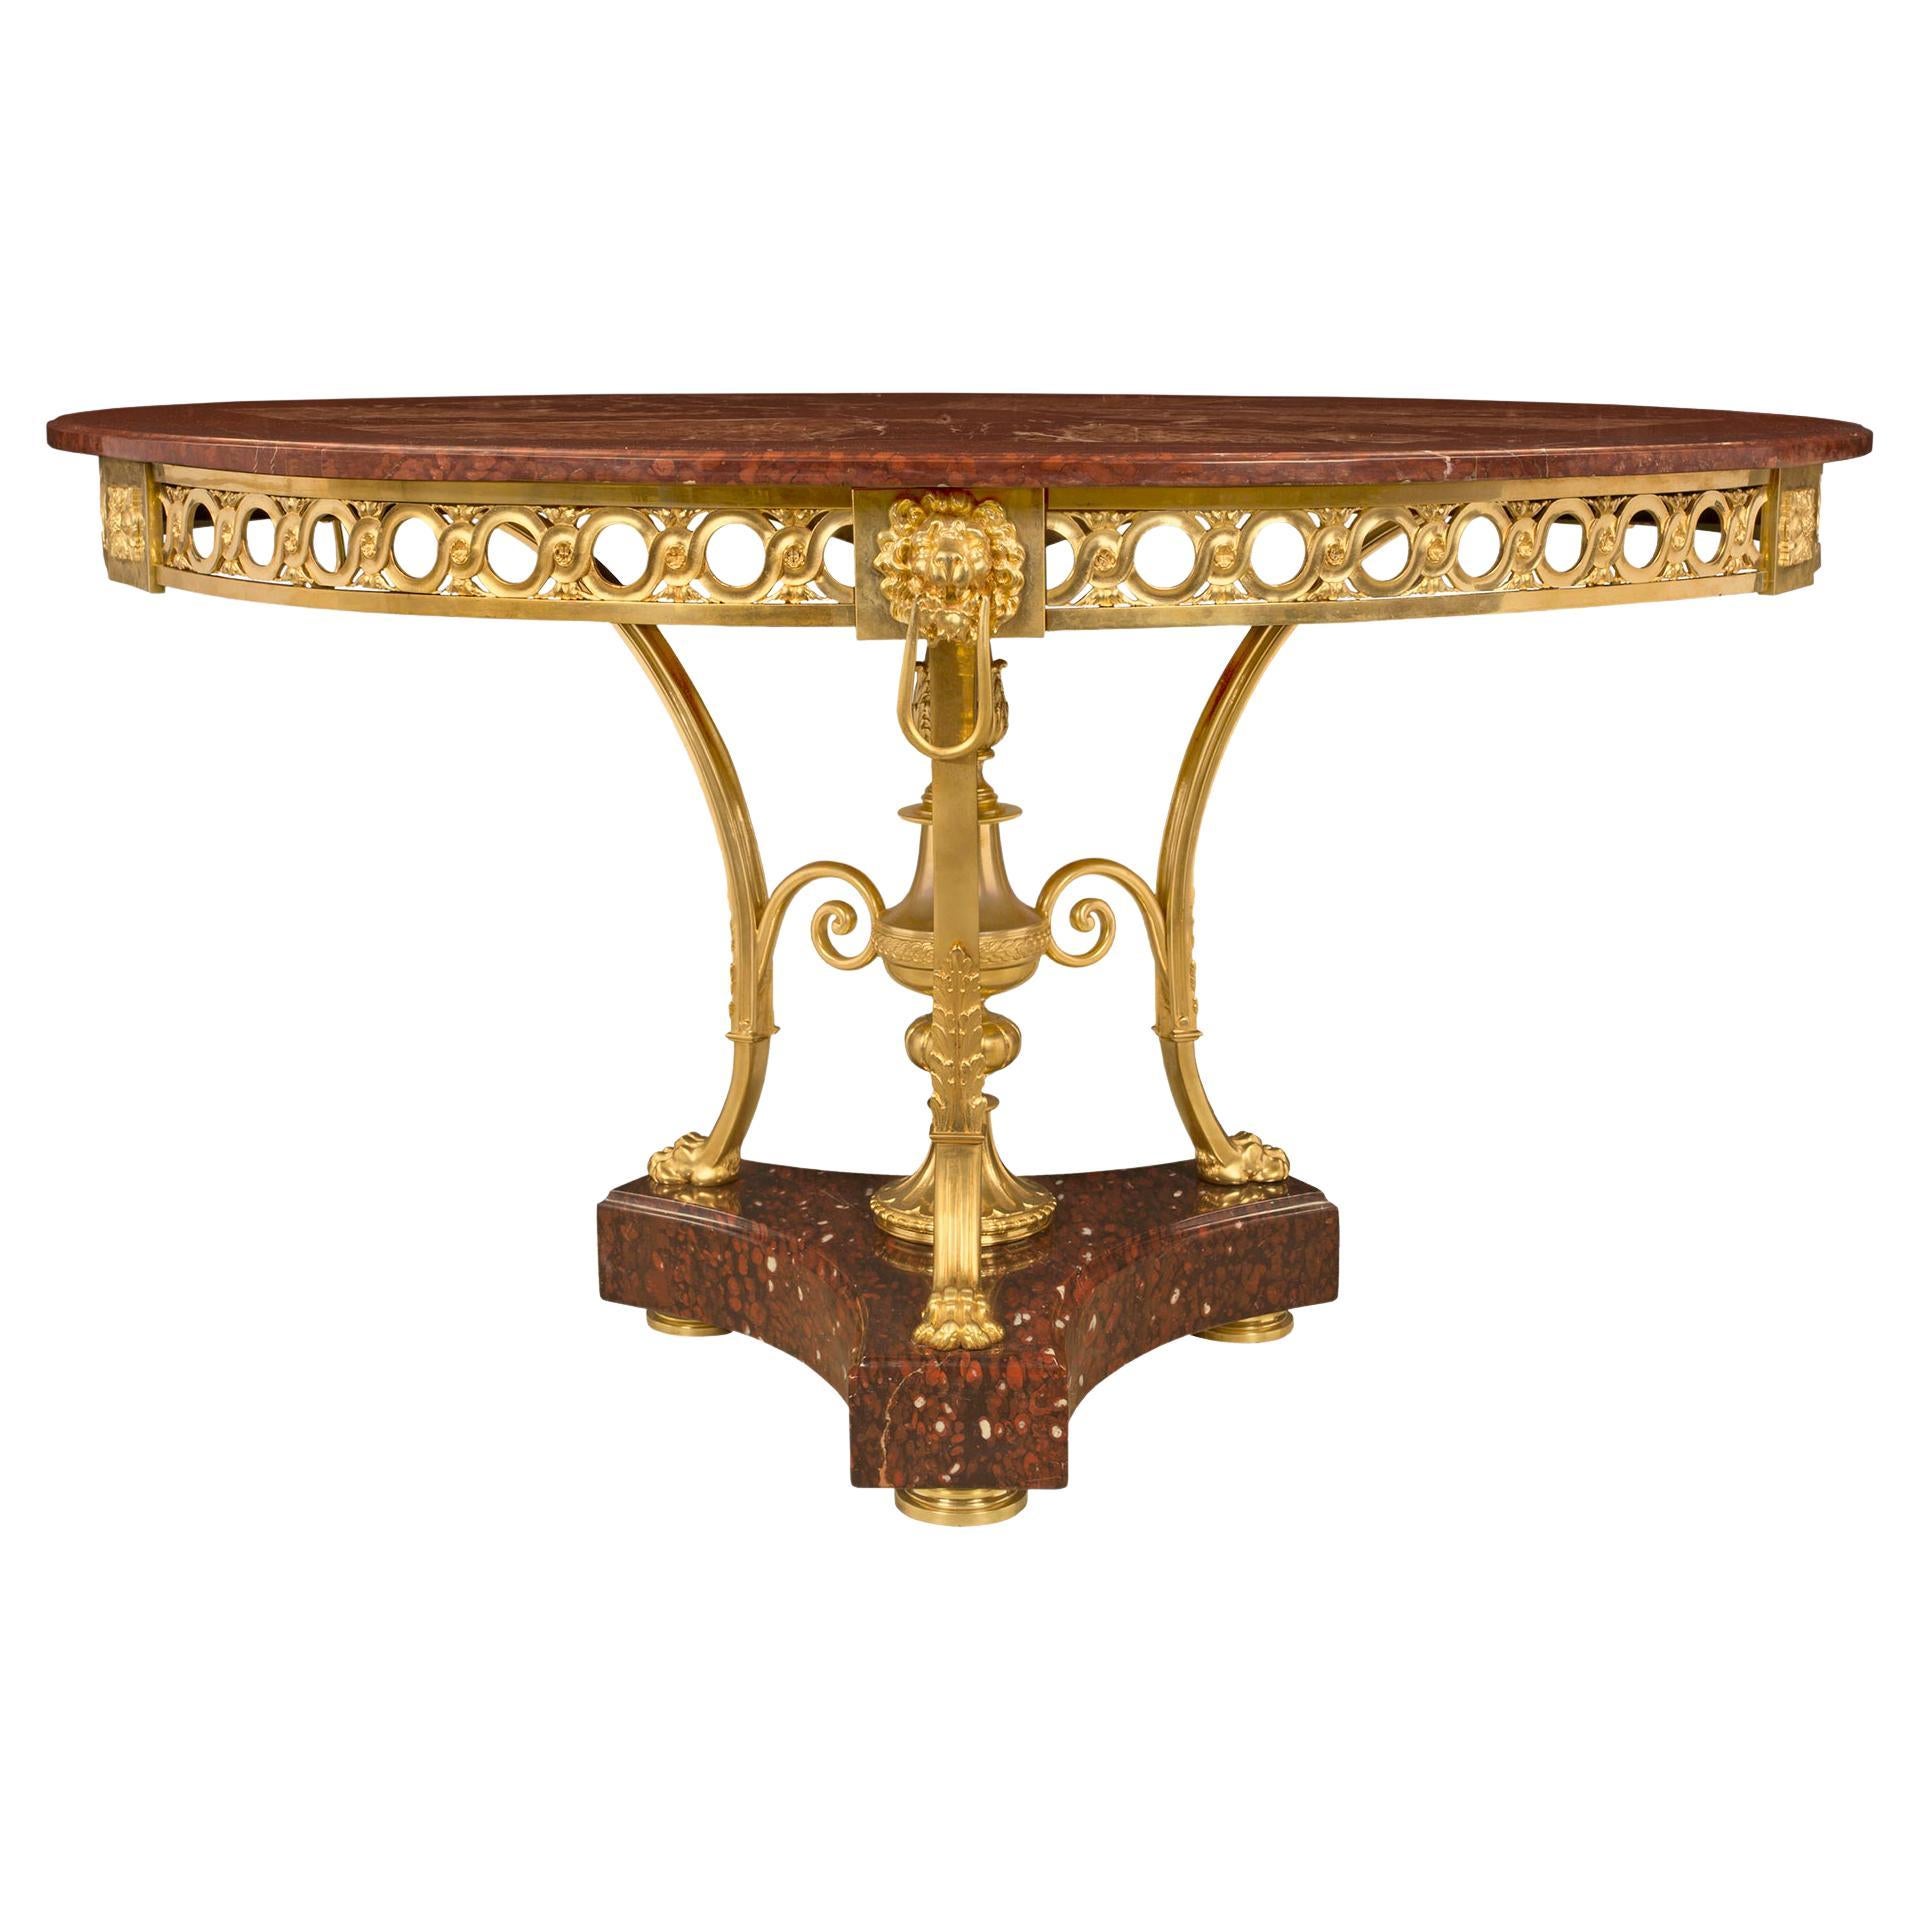 French 19th Century Neoclassical Style Ormolu and Griotte Marble Center Table For Sale